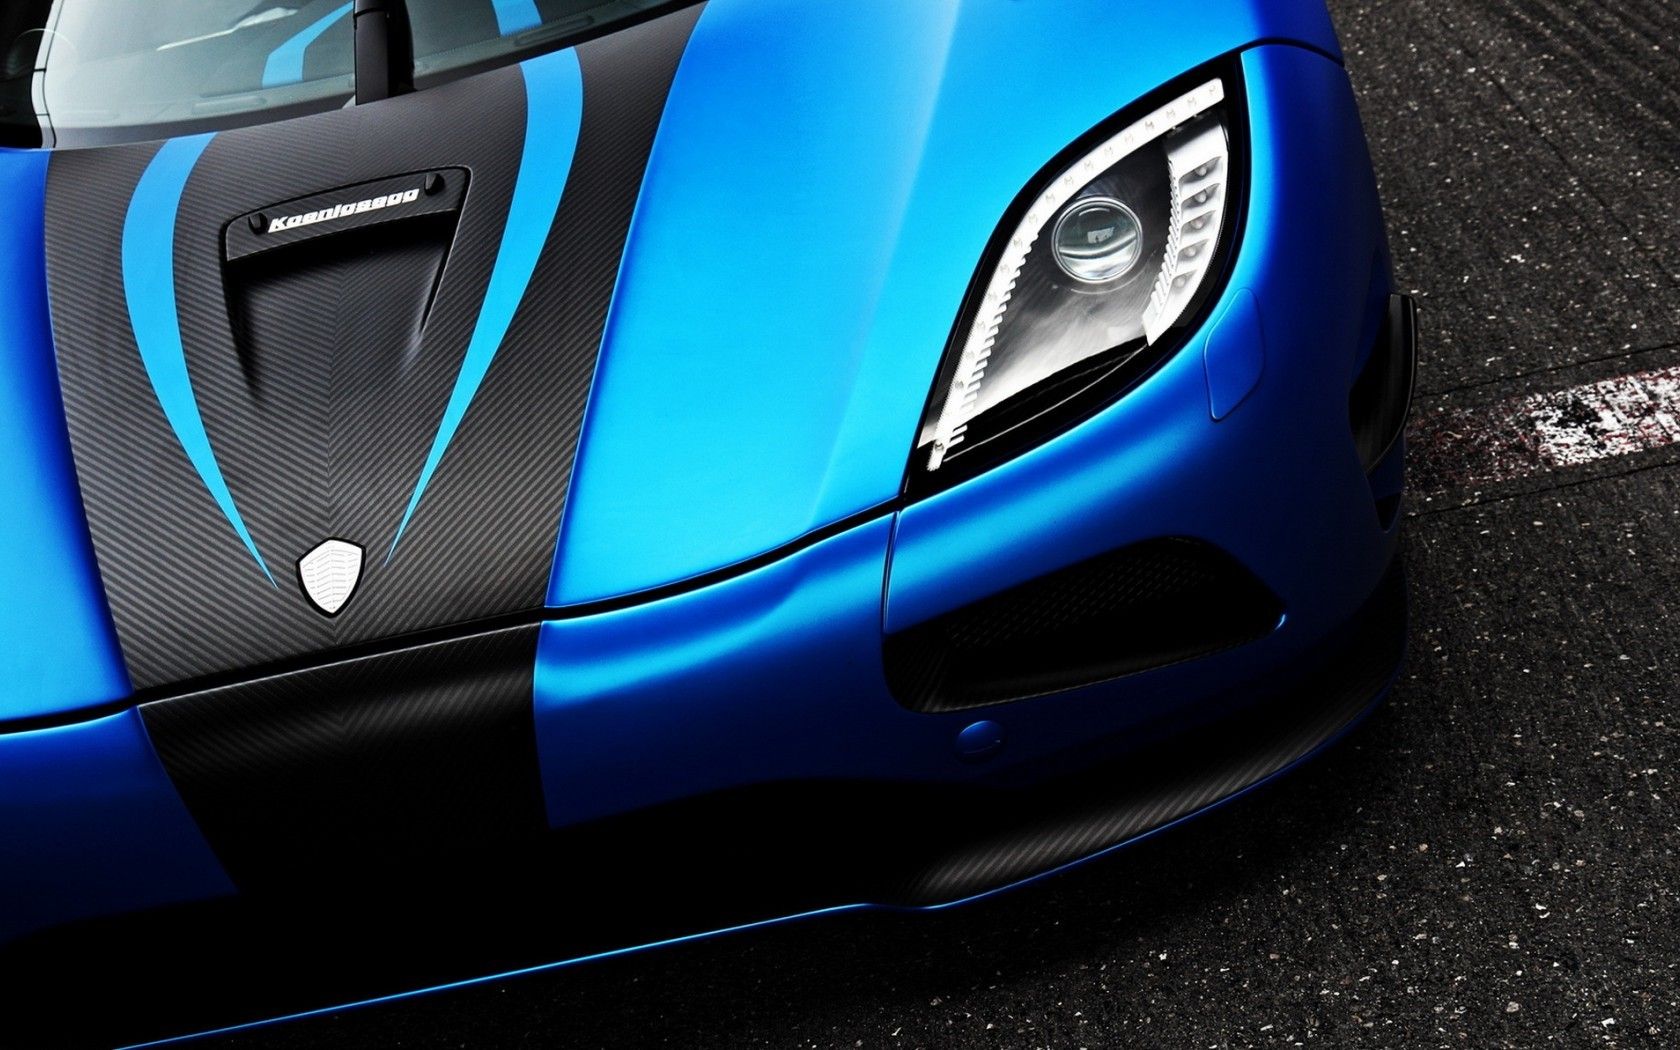 21 Koenigsegg Agera HD Wallpapers | Backgrounds - Wallpaper Abyss